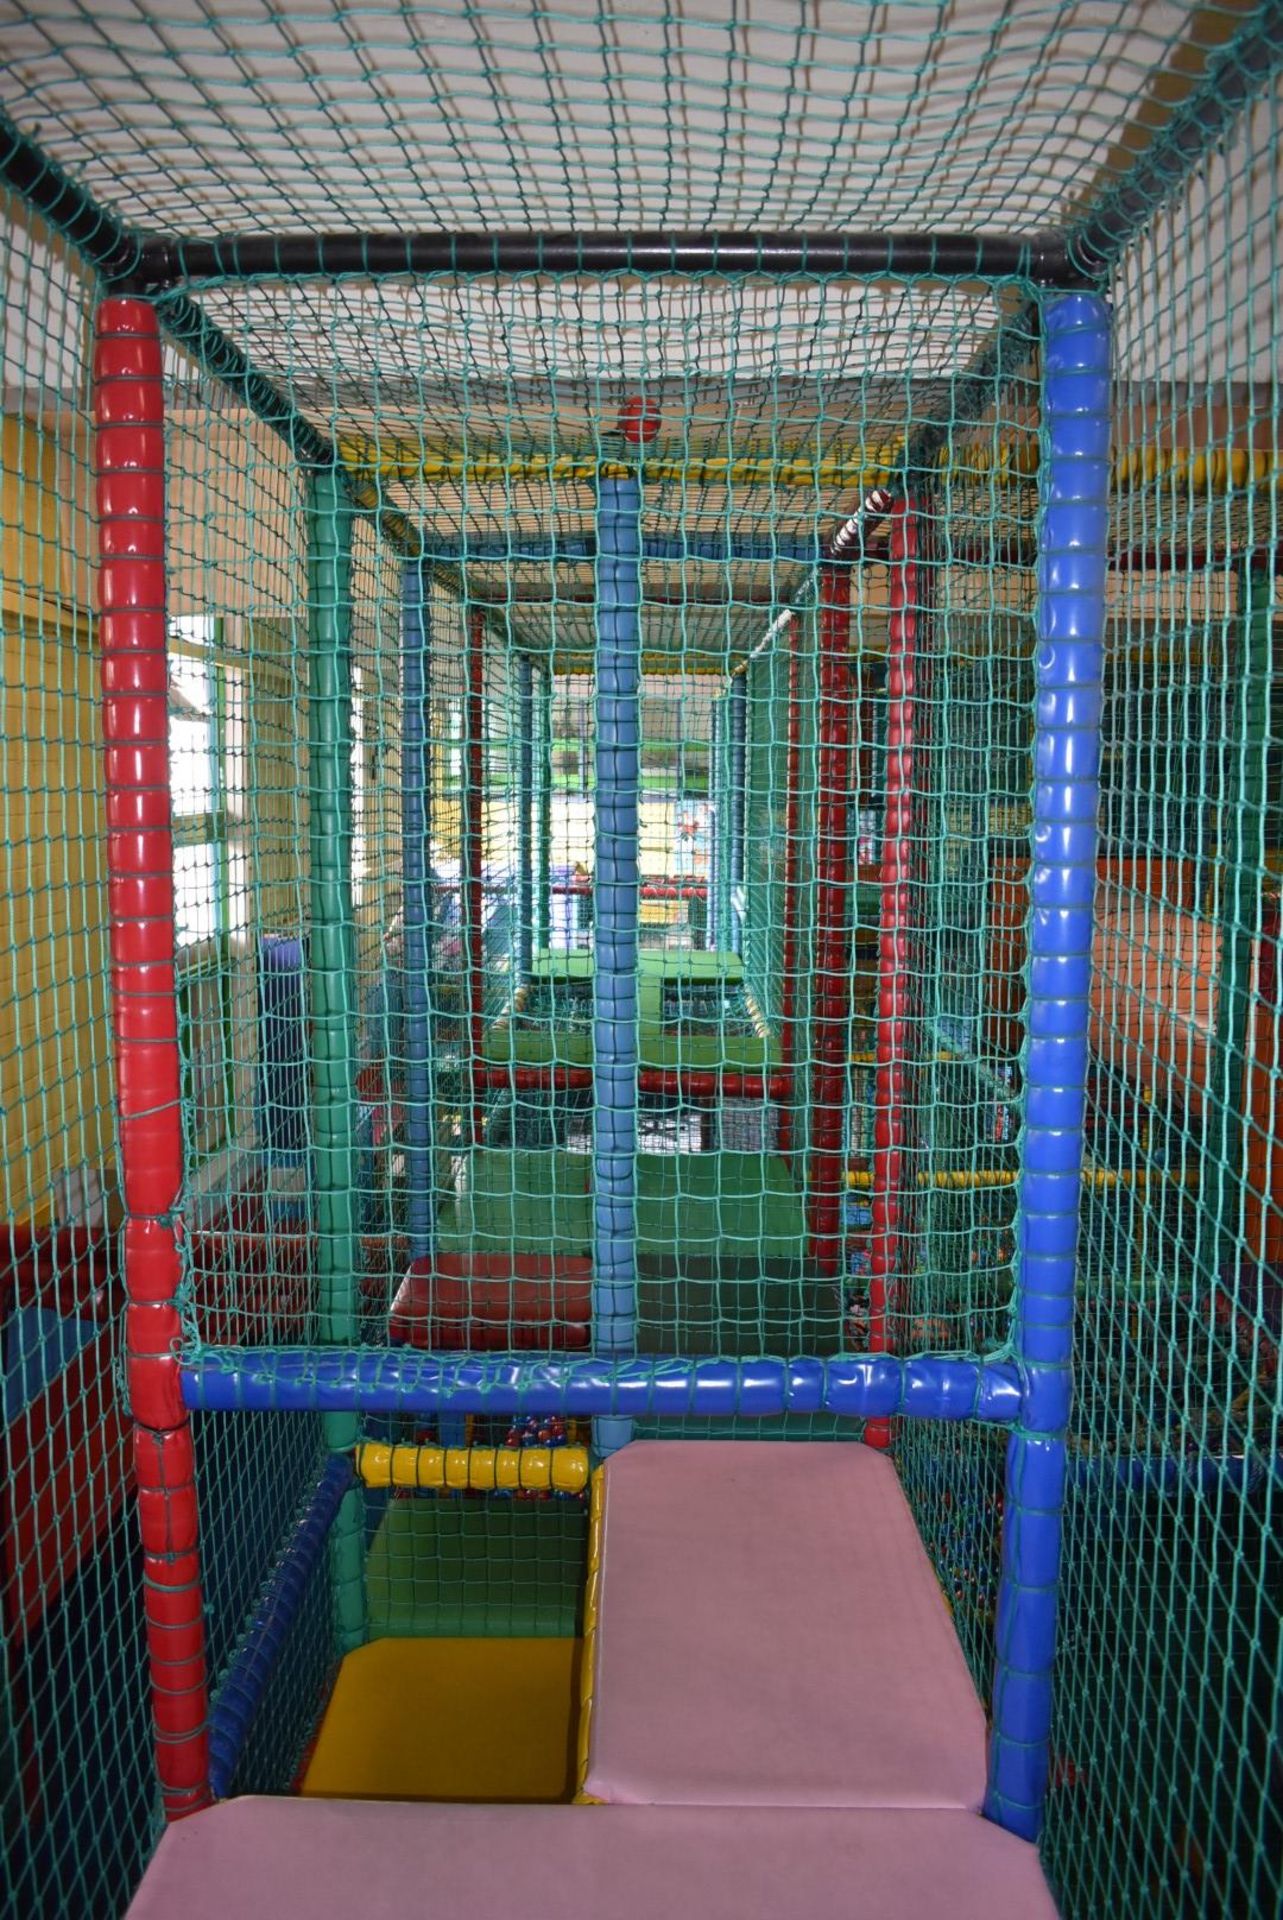 Bramleys Big Adventure Playground - Giant Action-Packed Playcentre With Slides, Zip Line Swings, - Image 54 of 128